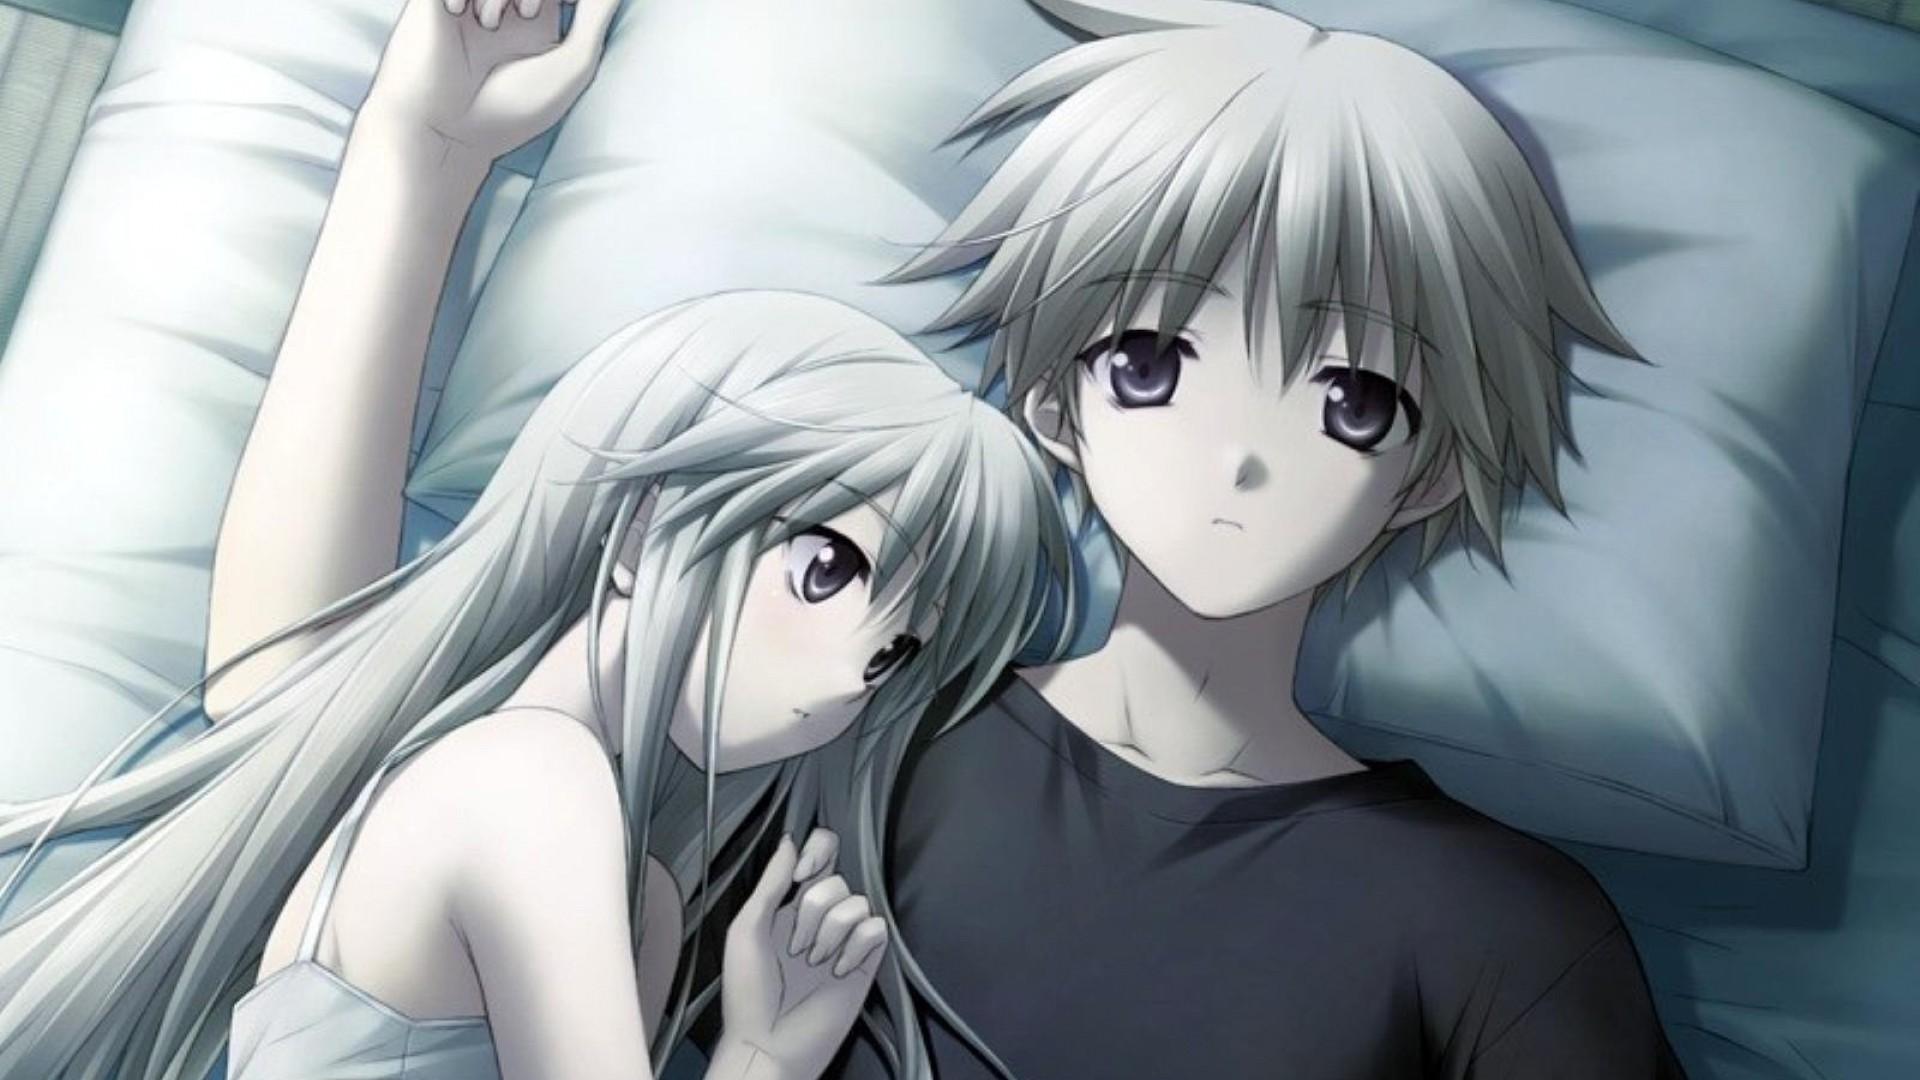 Anime Girl And Boy Bed Wallpapers - Wallpaper Cave